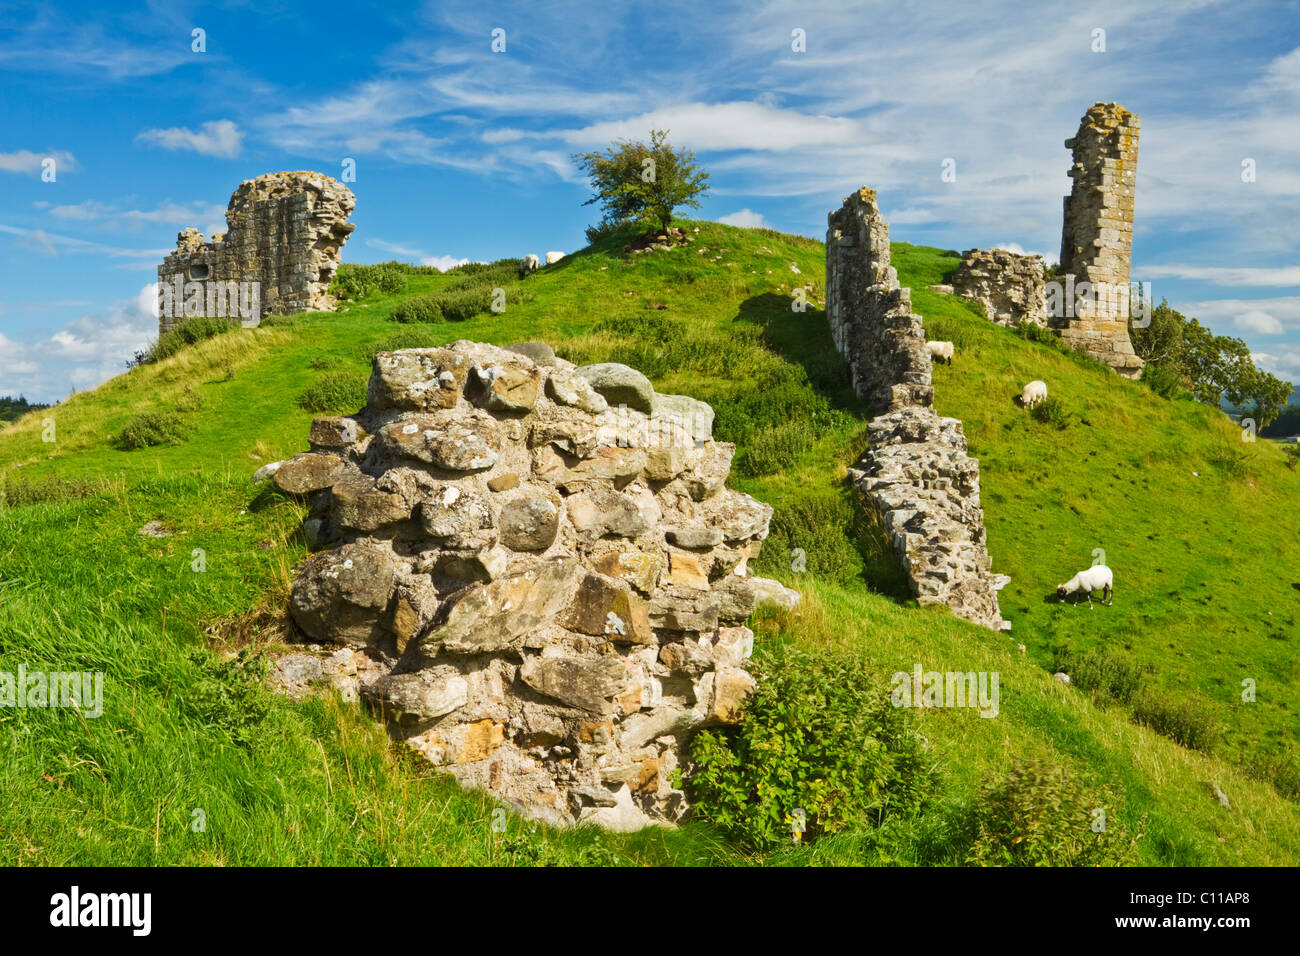 The ruined walls of Harbottle Castle in the Northumberland National Park, England. OS Ref: NT 931047 Stock Photo